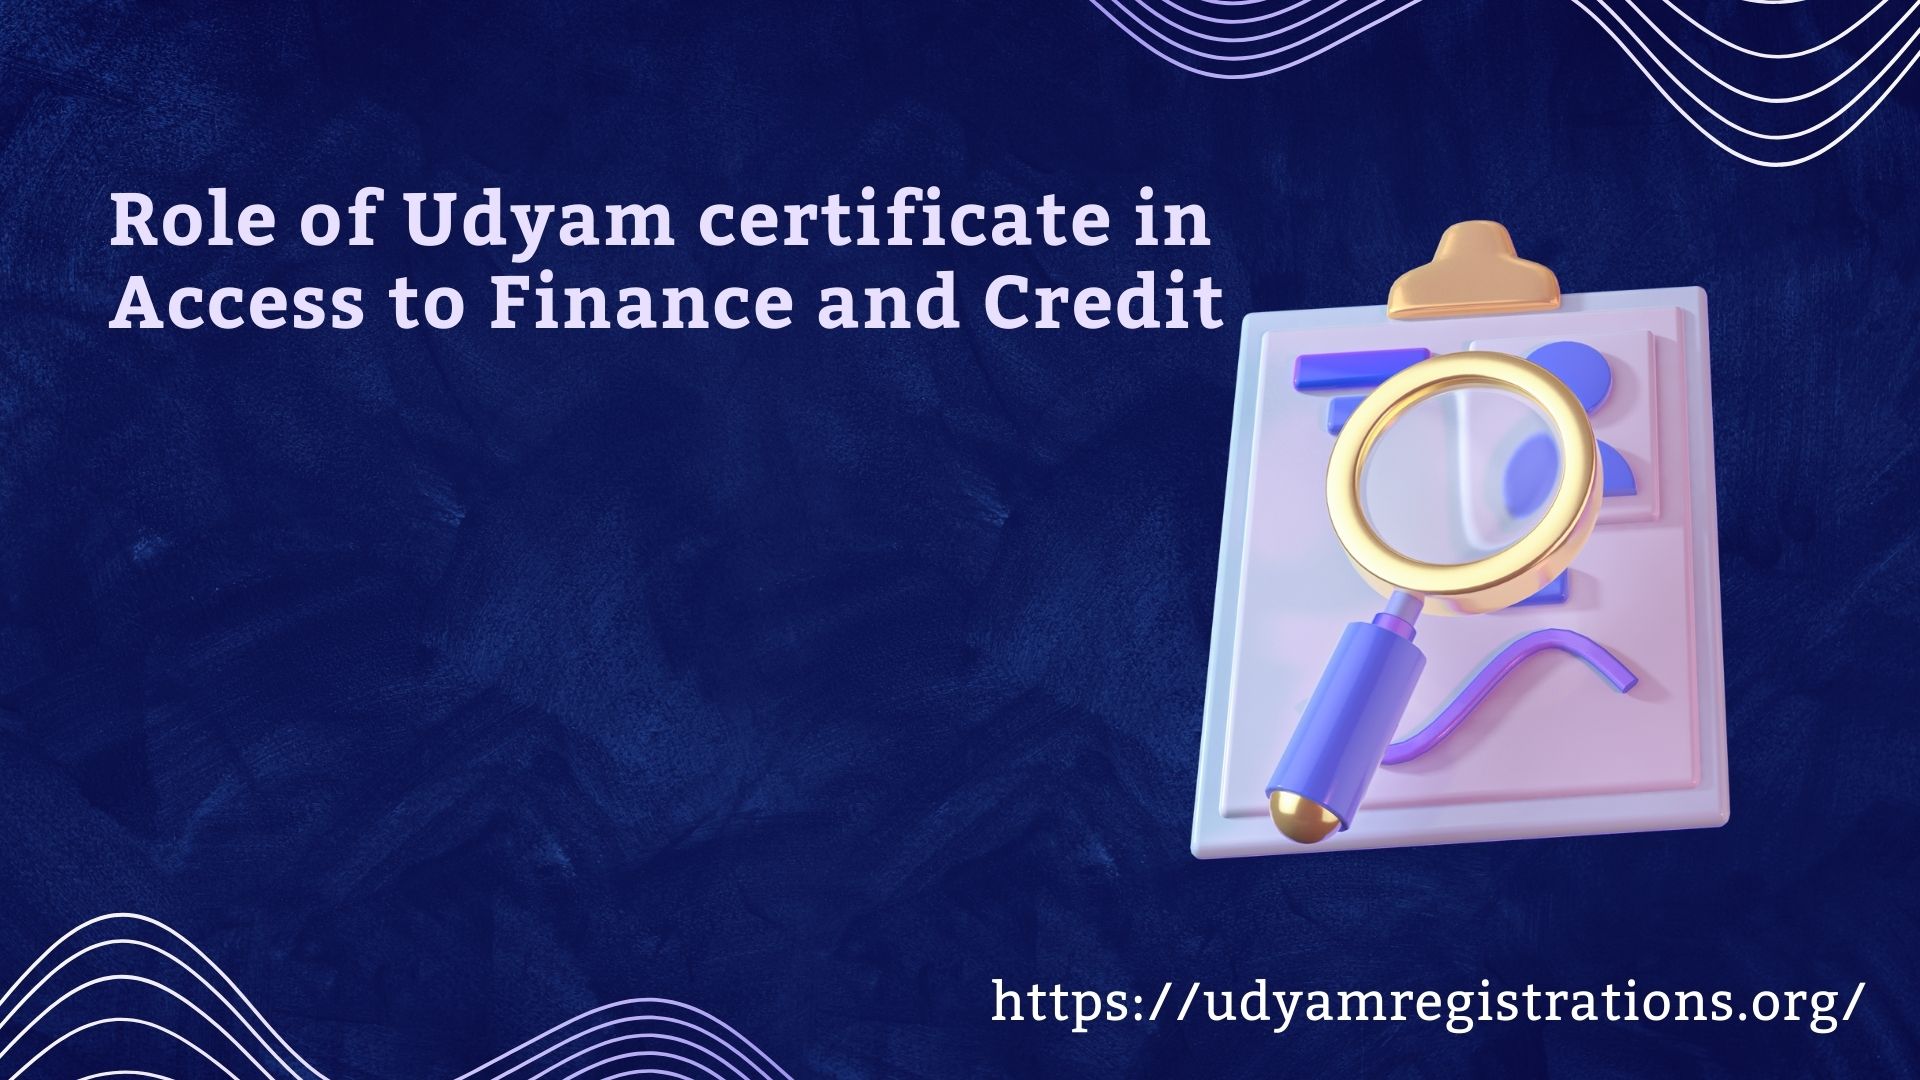 Role of Udyam certificate in Access to Finance and Credit